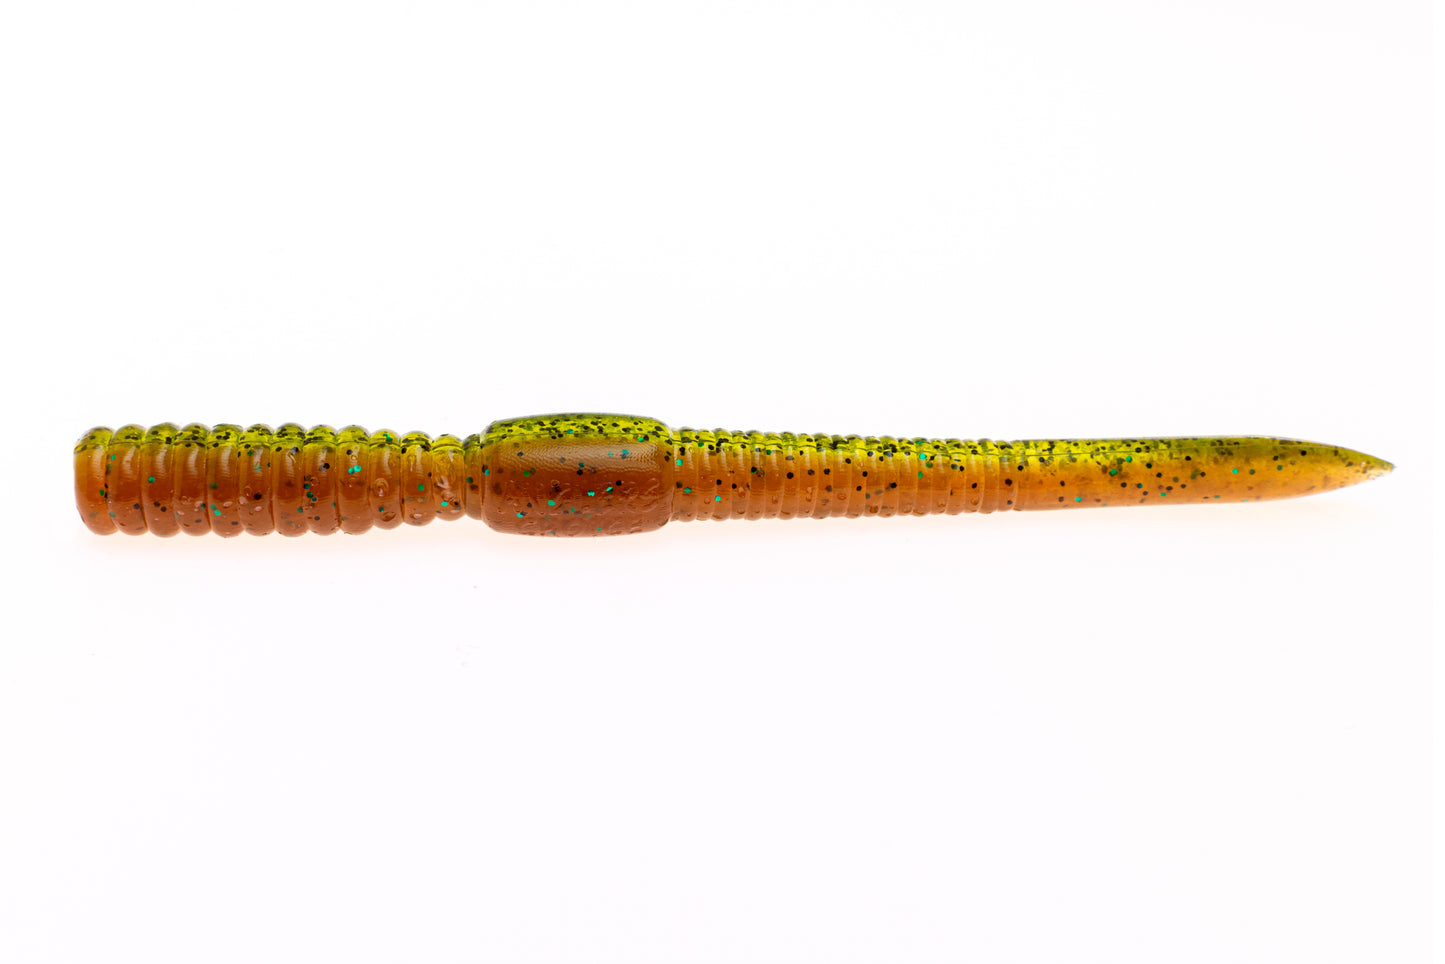 4" Spear Tail Worm